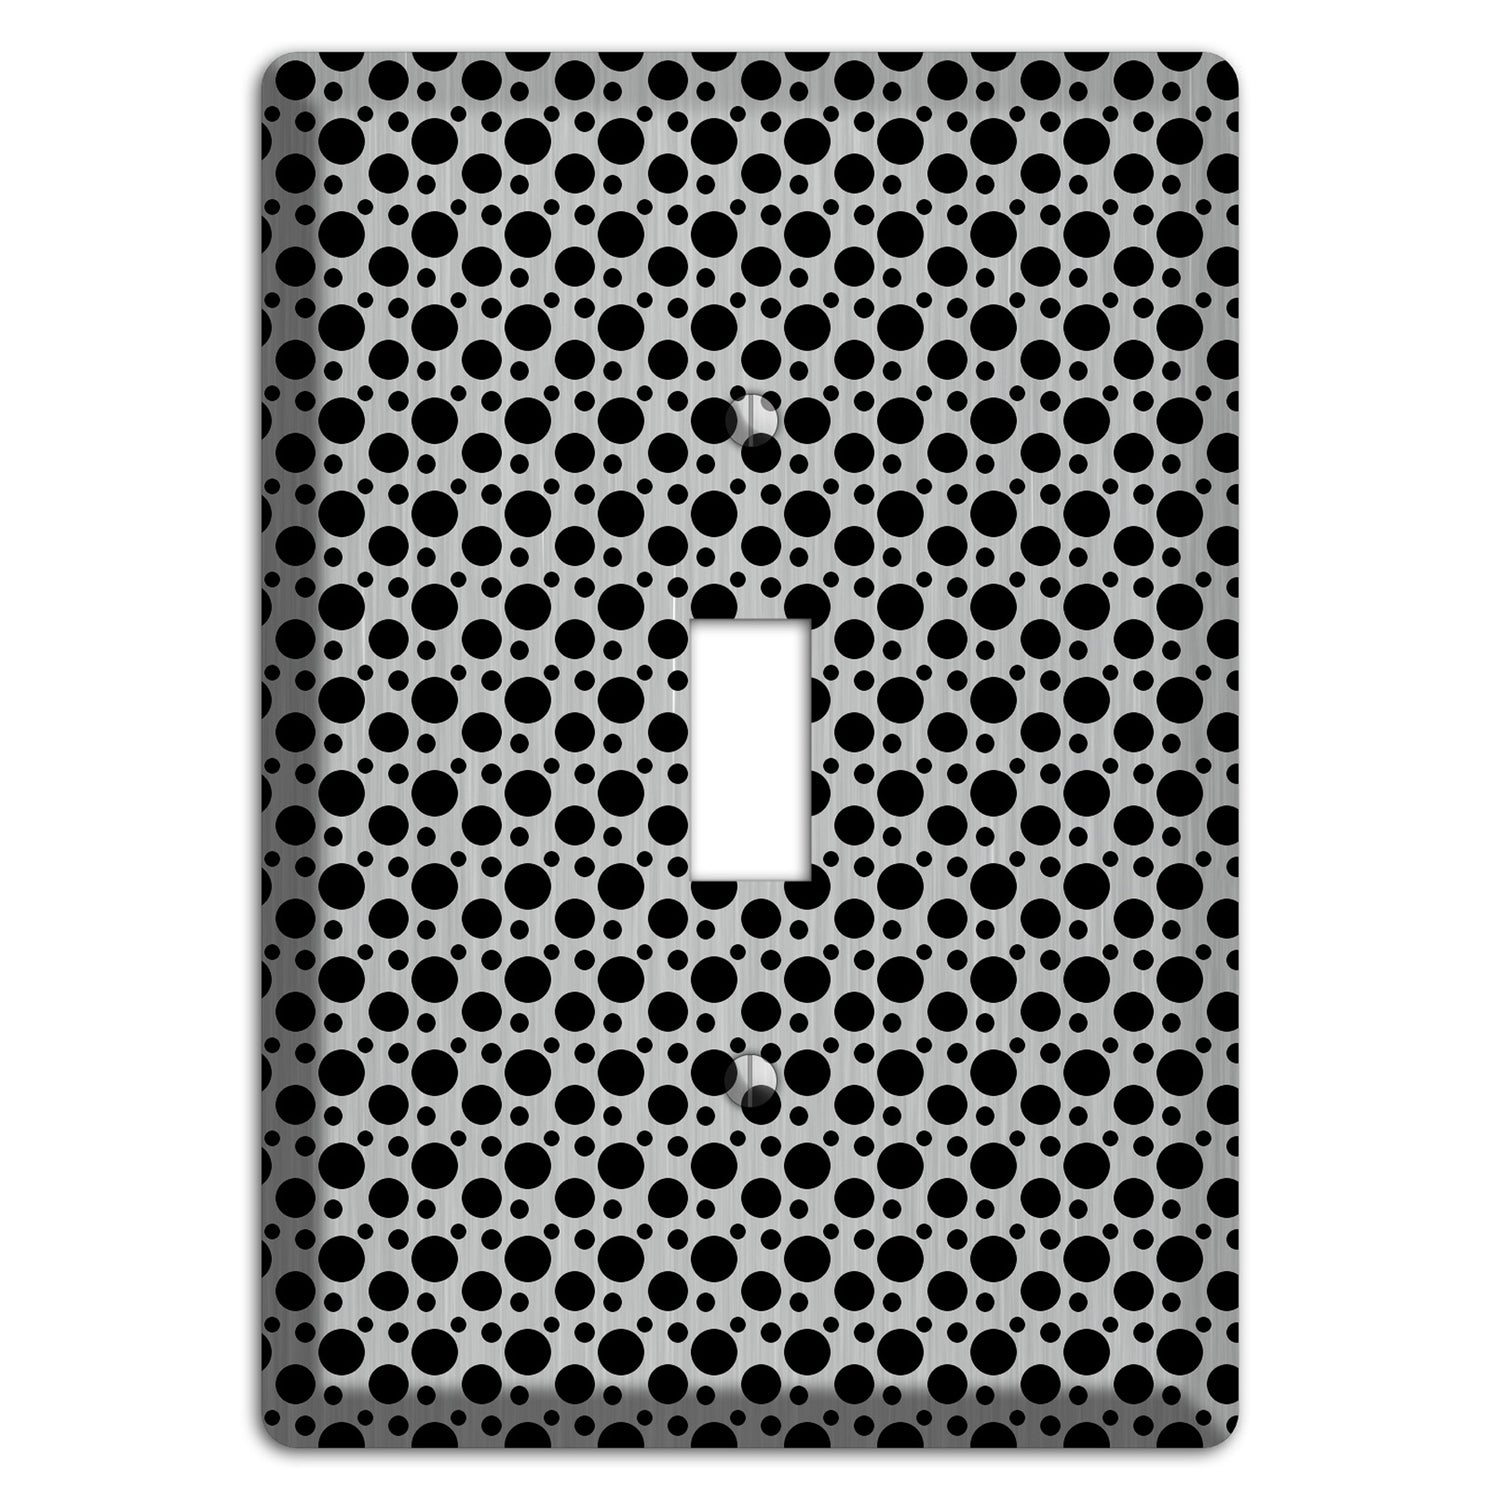 Small and Tiny Polka Dots Stainless Cover Plates